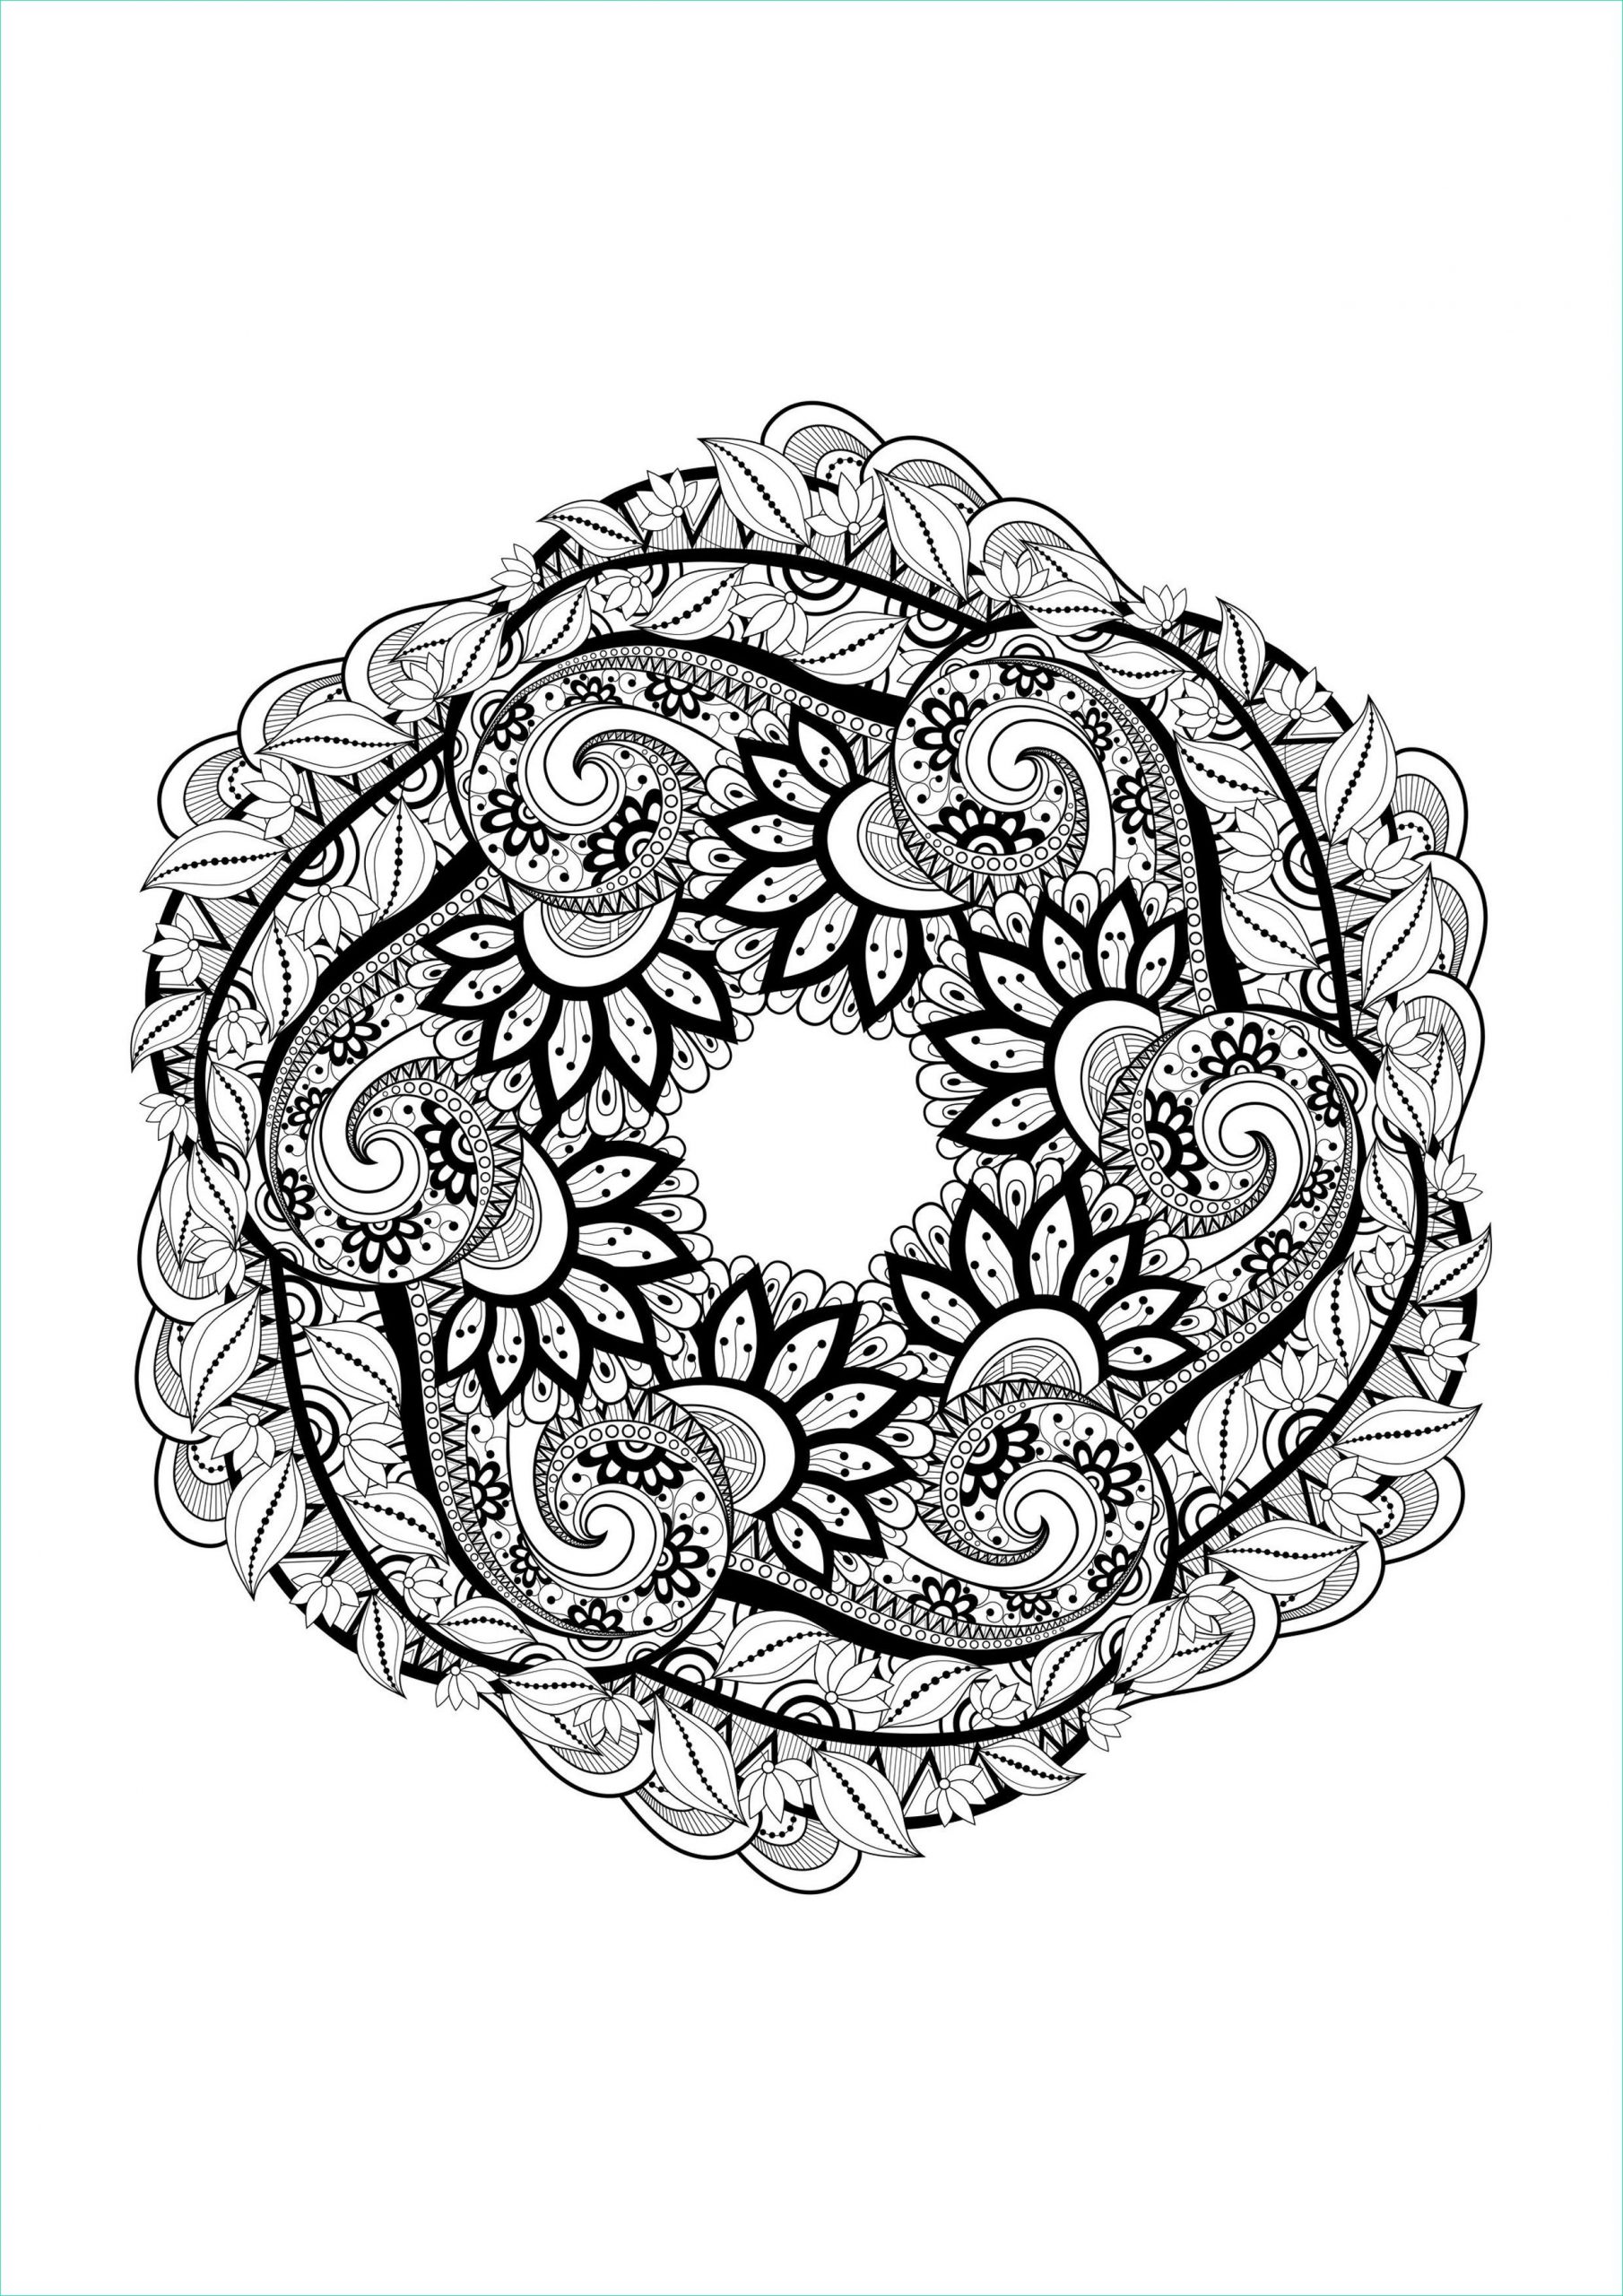 image=very difficult mandala with flowers and leaves full of details 1